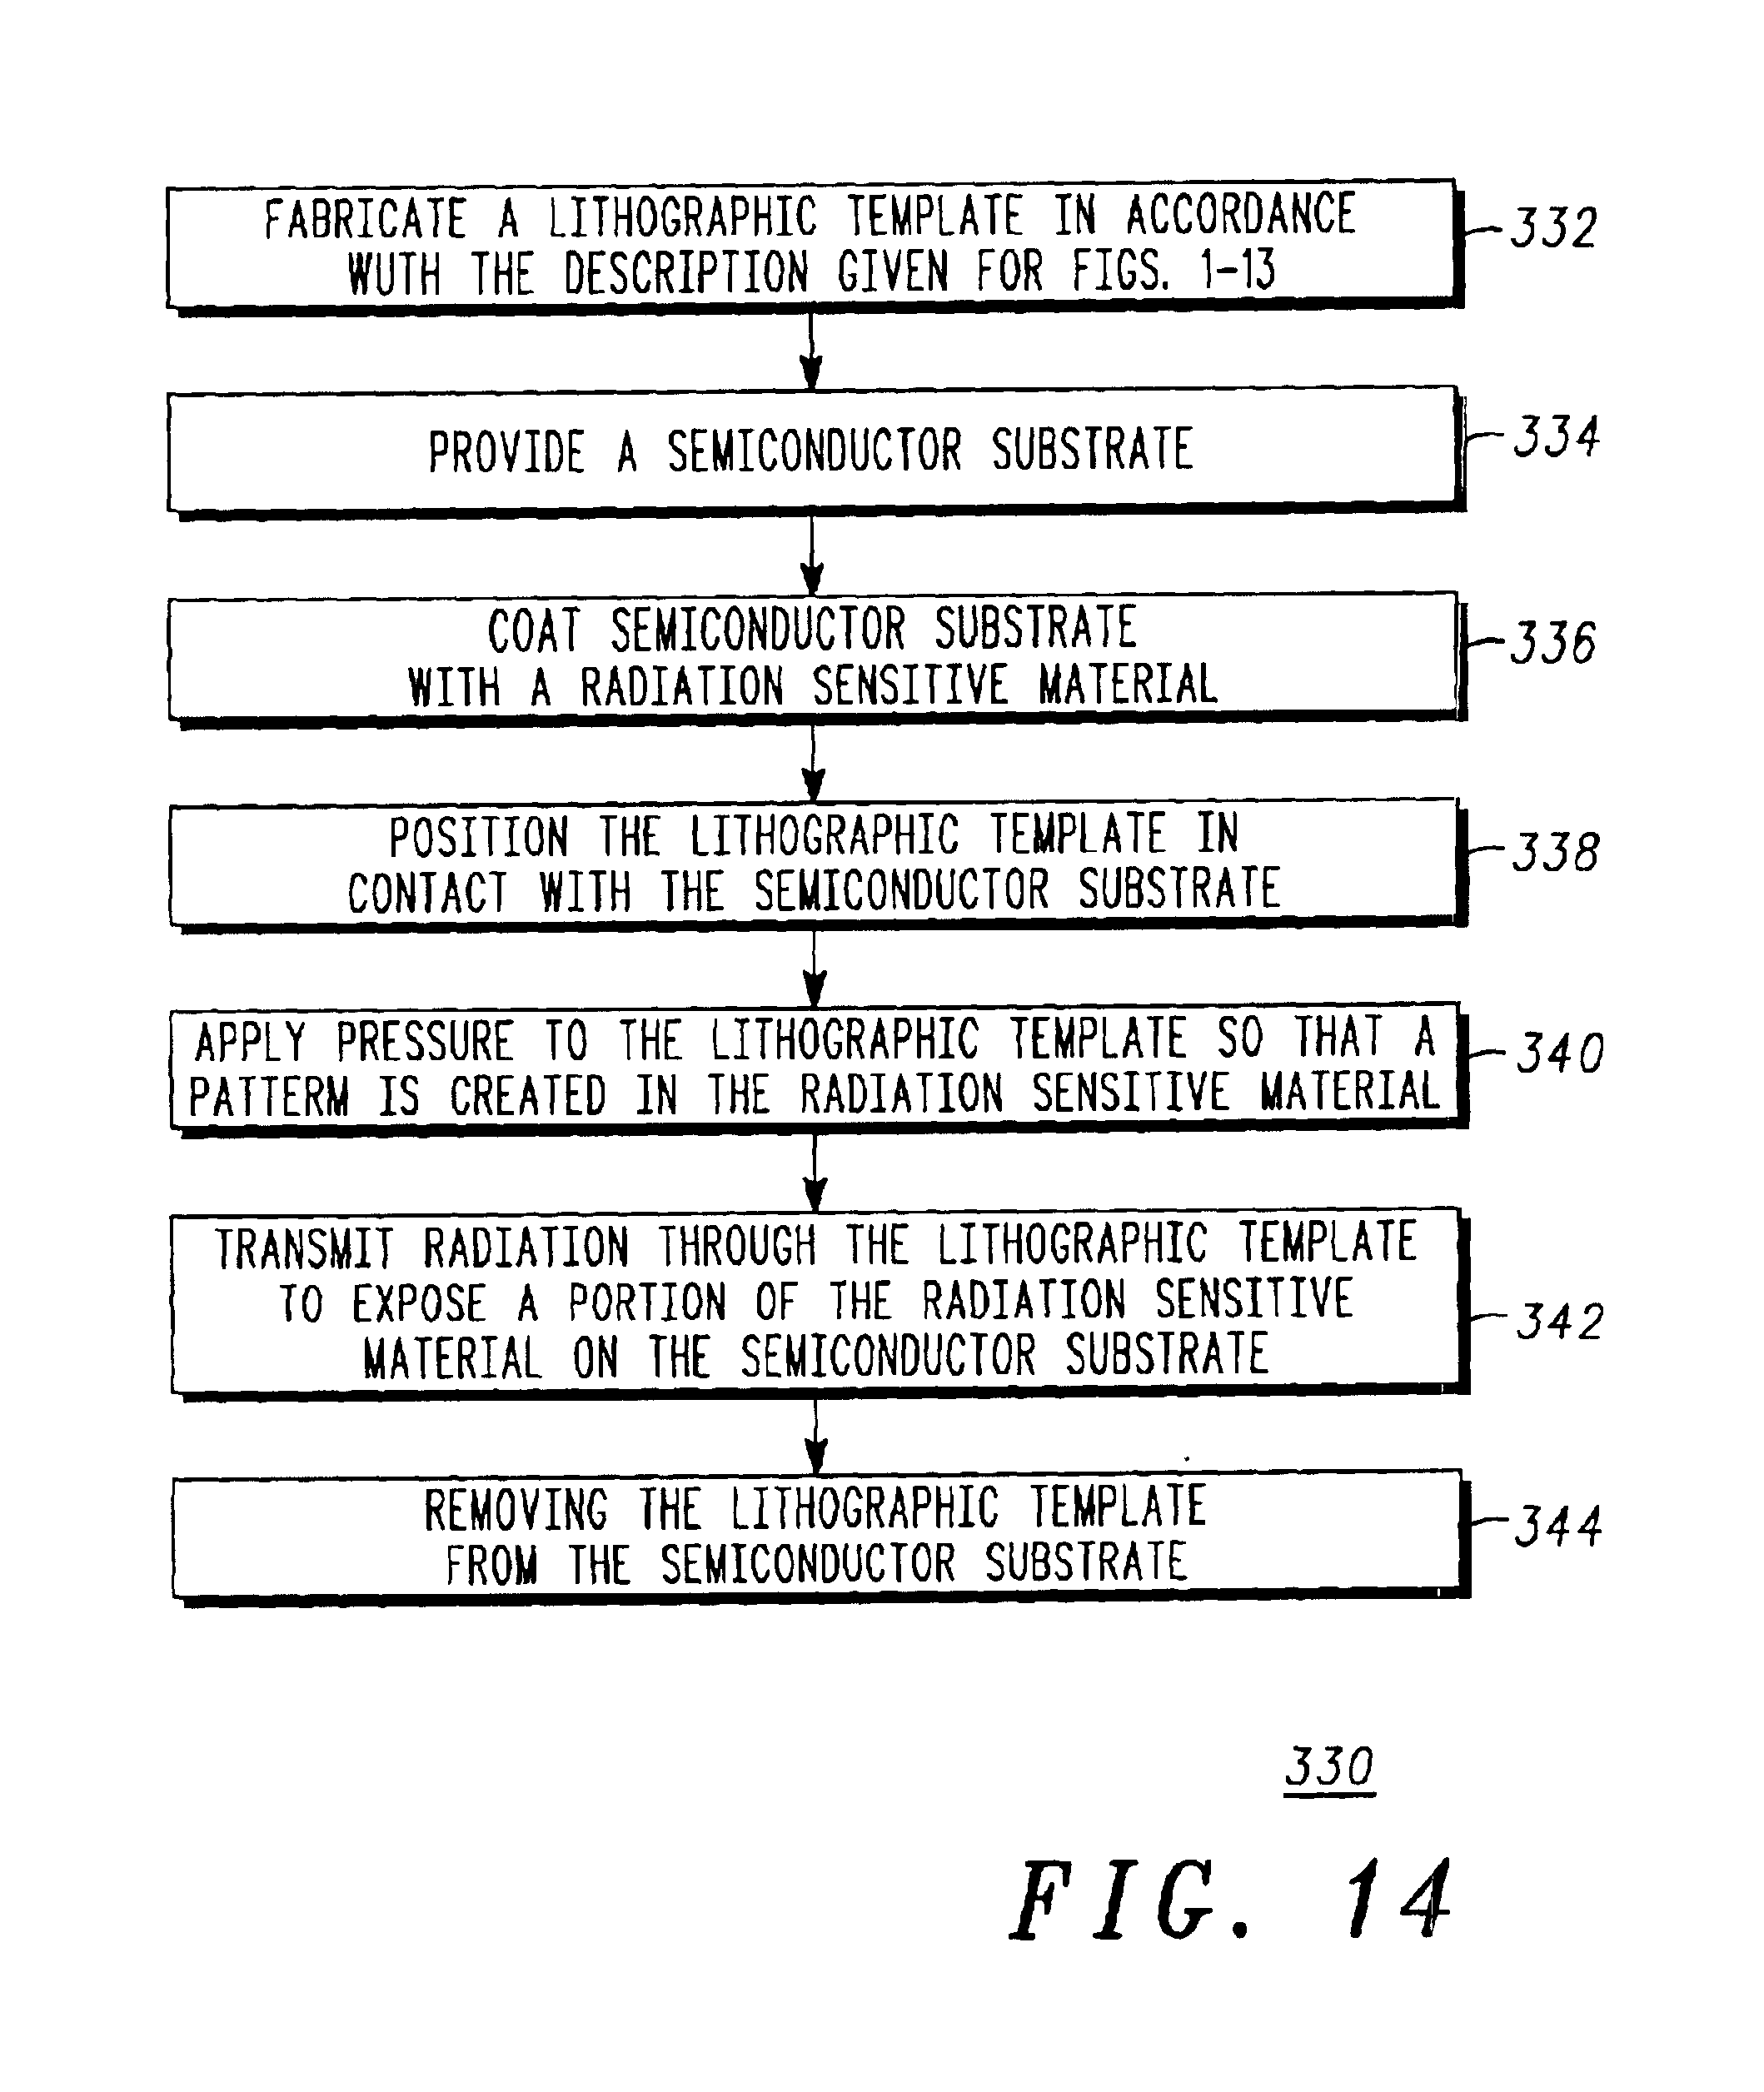 Lithographic template and method of formation and use